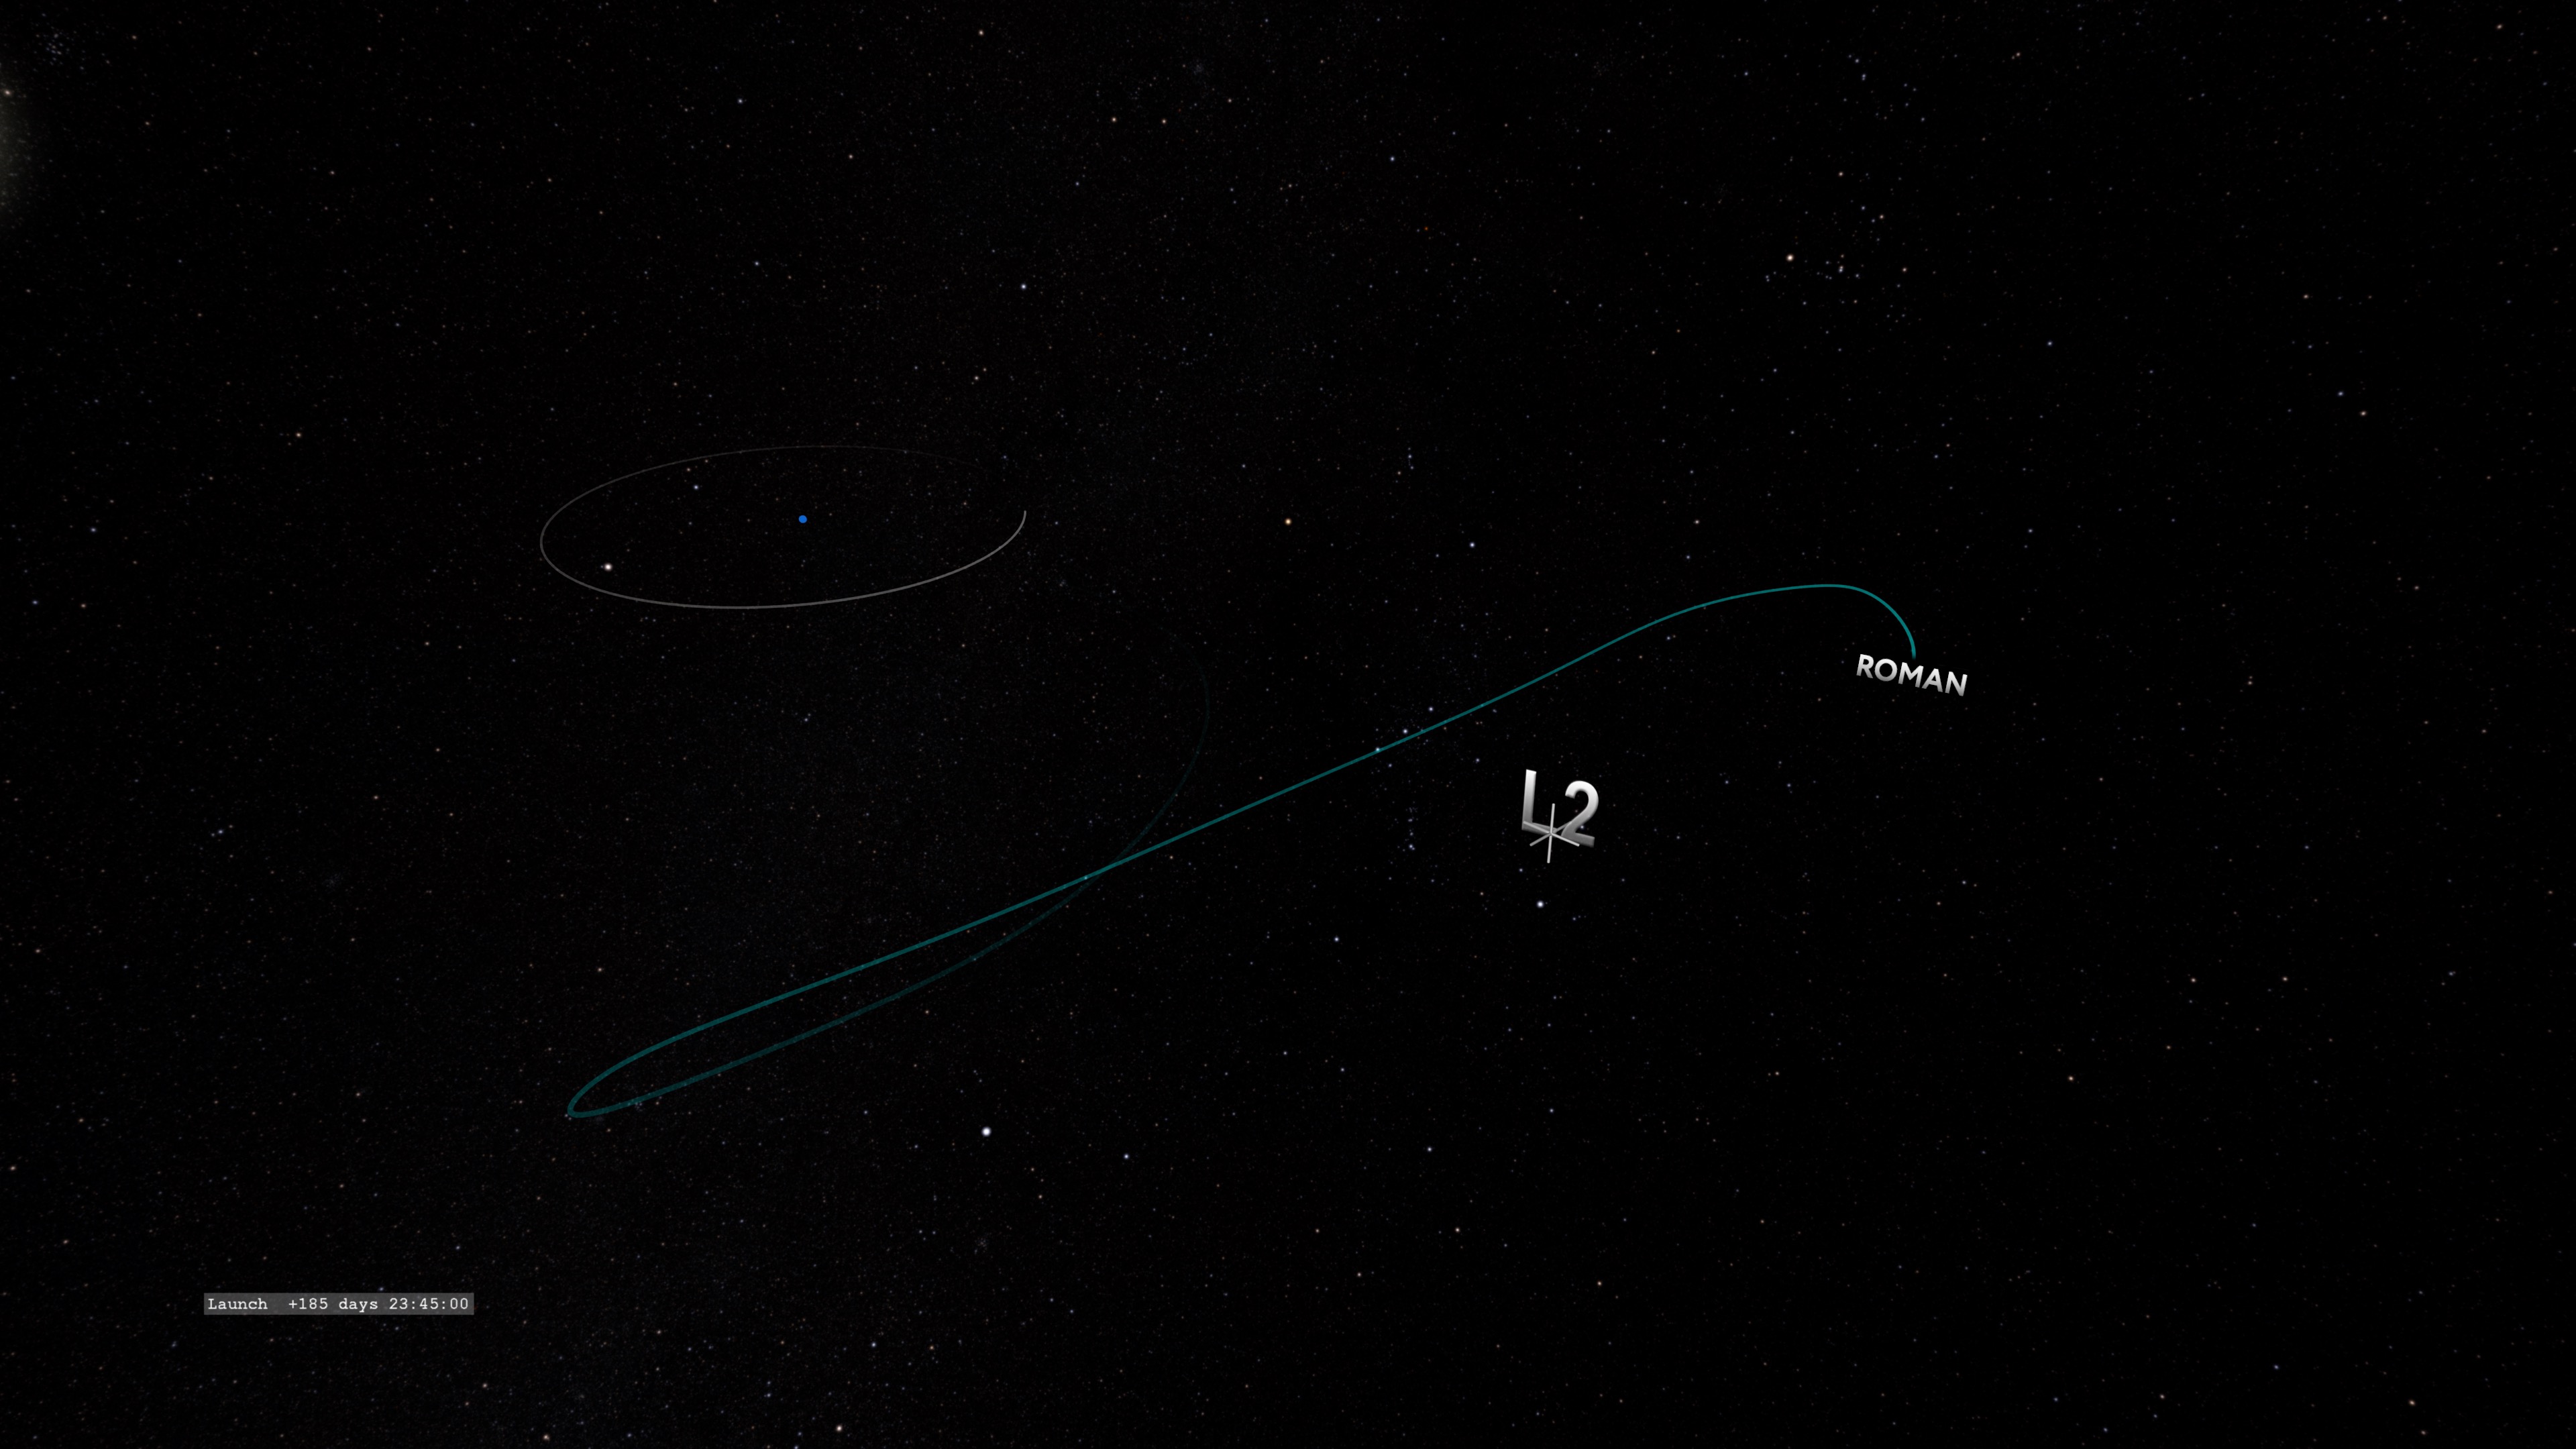 This visualization follows the Roman Space Telescope on its trajectory to the Sun-Earth Lagrange Two point.  The original "WFIRST" label is covered by a new "Roman" label.